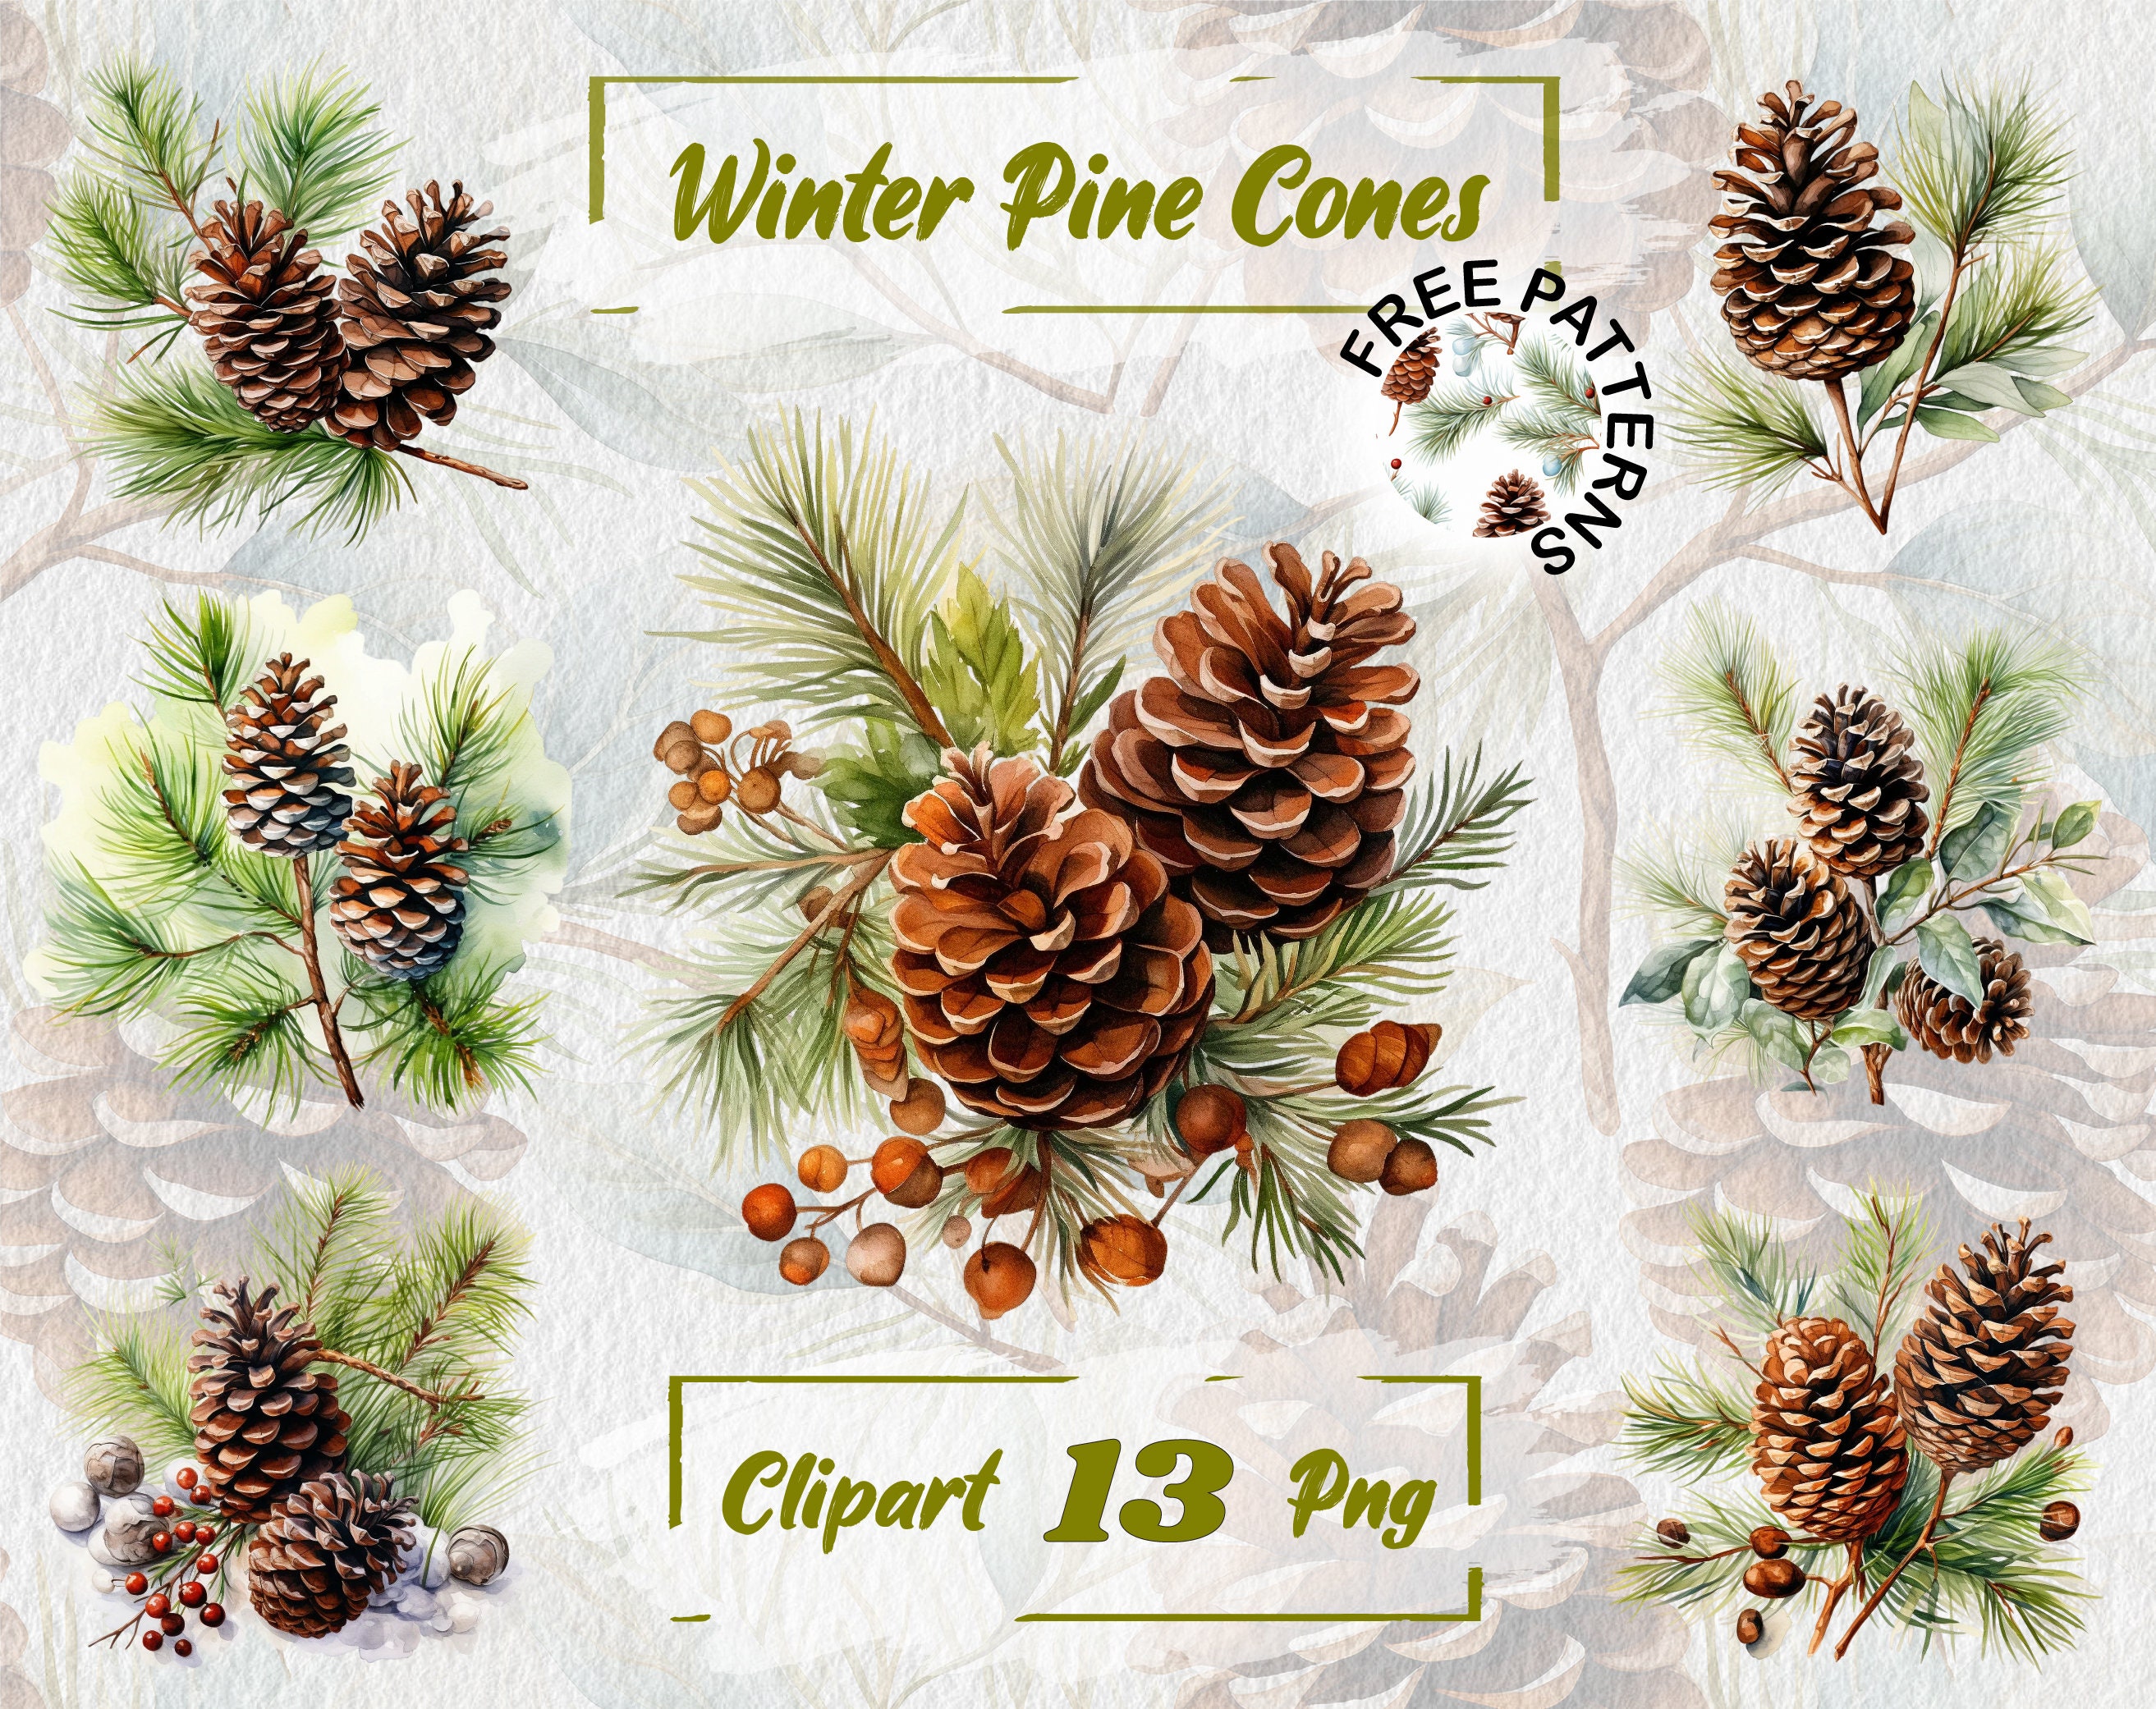 Evergreen Pine Branches With Cones Under The Snow, Winter Trees In The Snow  In Winter, Christmas, Pine Cone PNG Transparent Image and Clipart for Free  Download